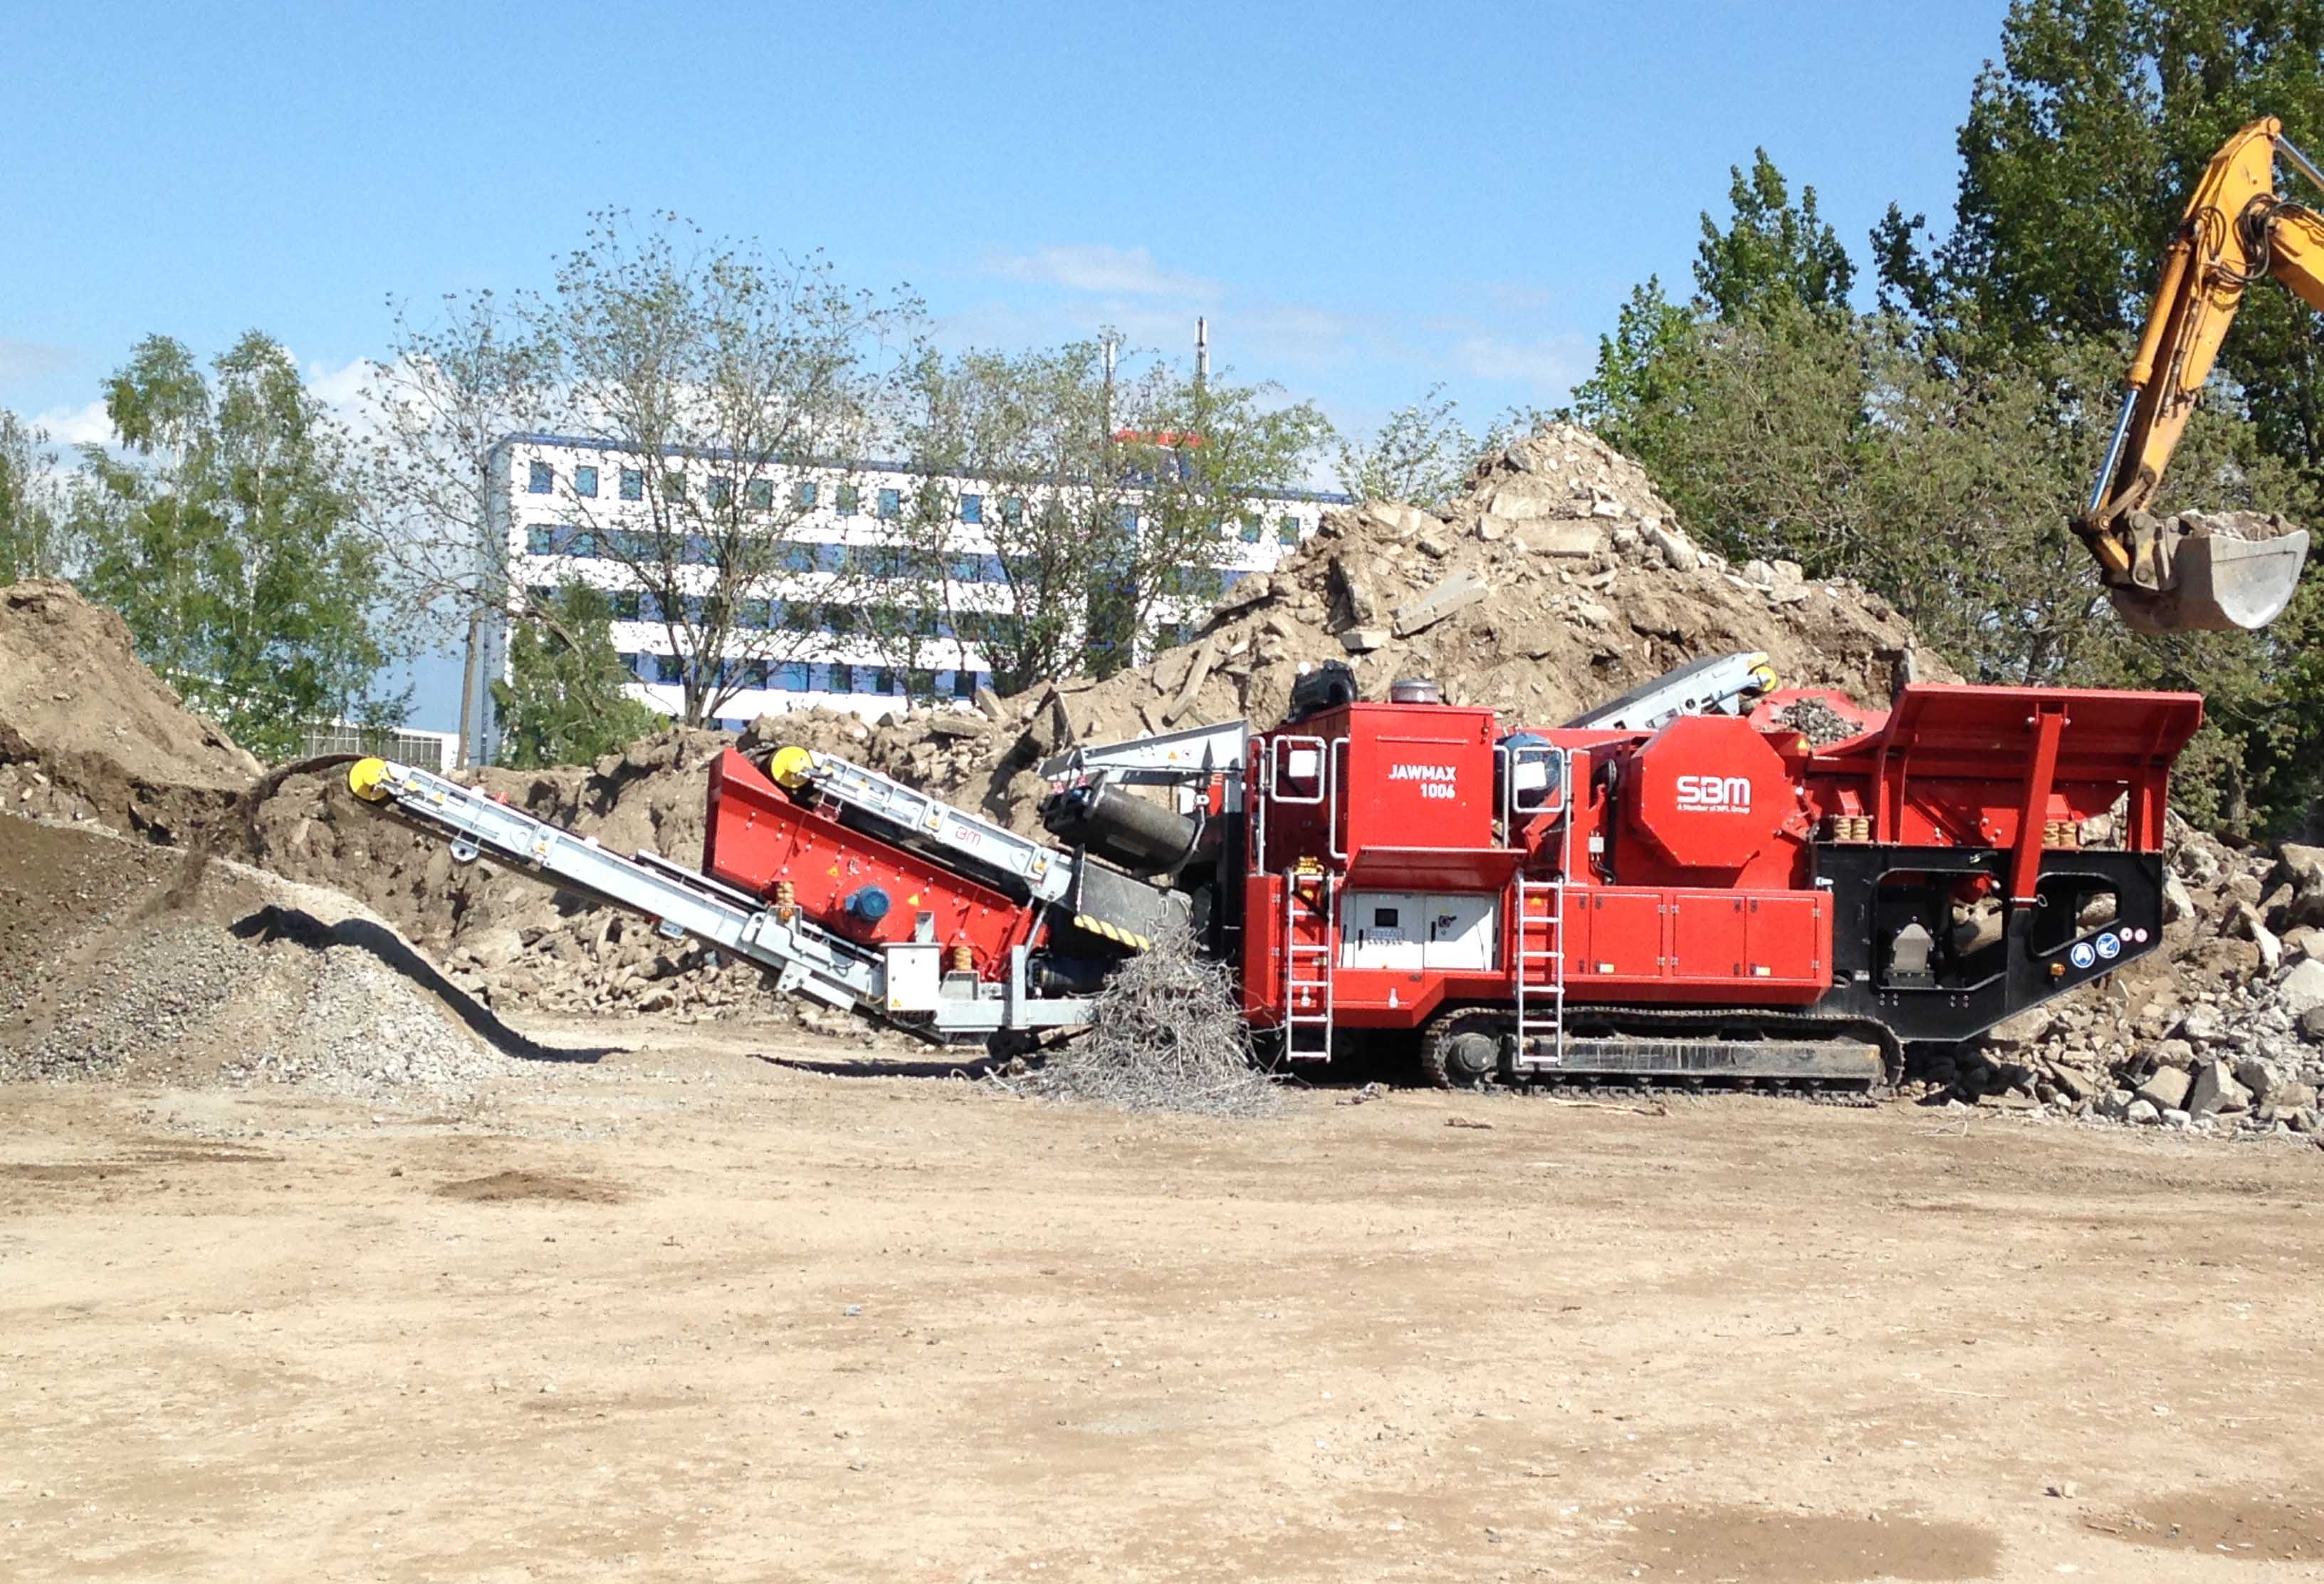 SBM JAWMAX 1006 mobile crushing and screening plant 